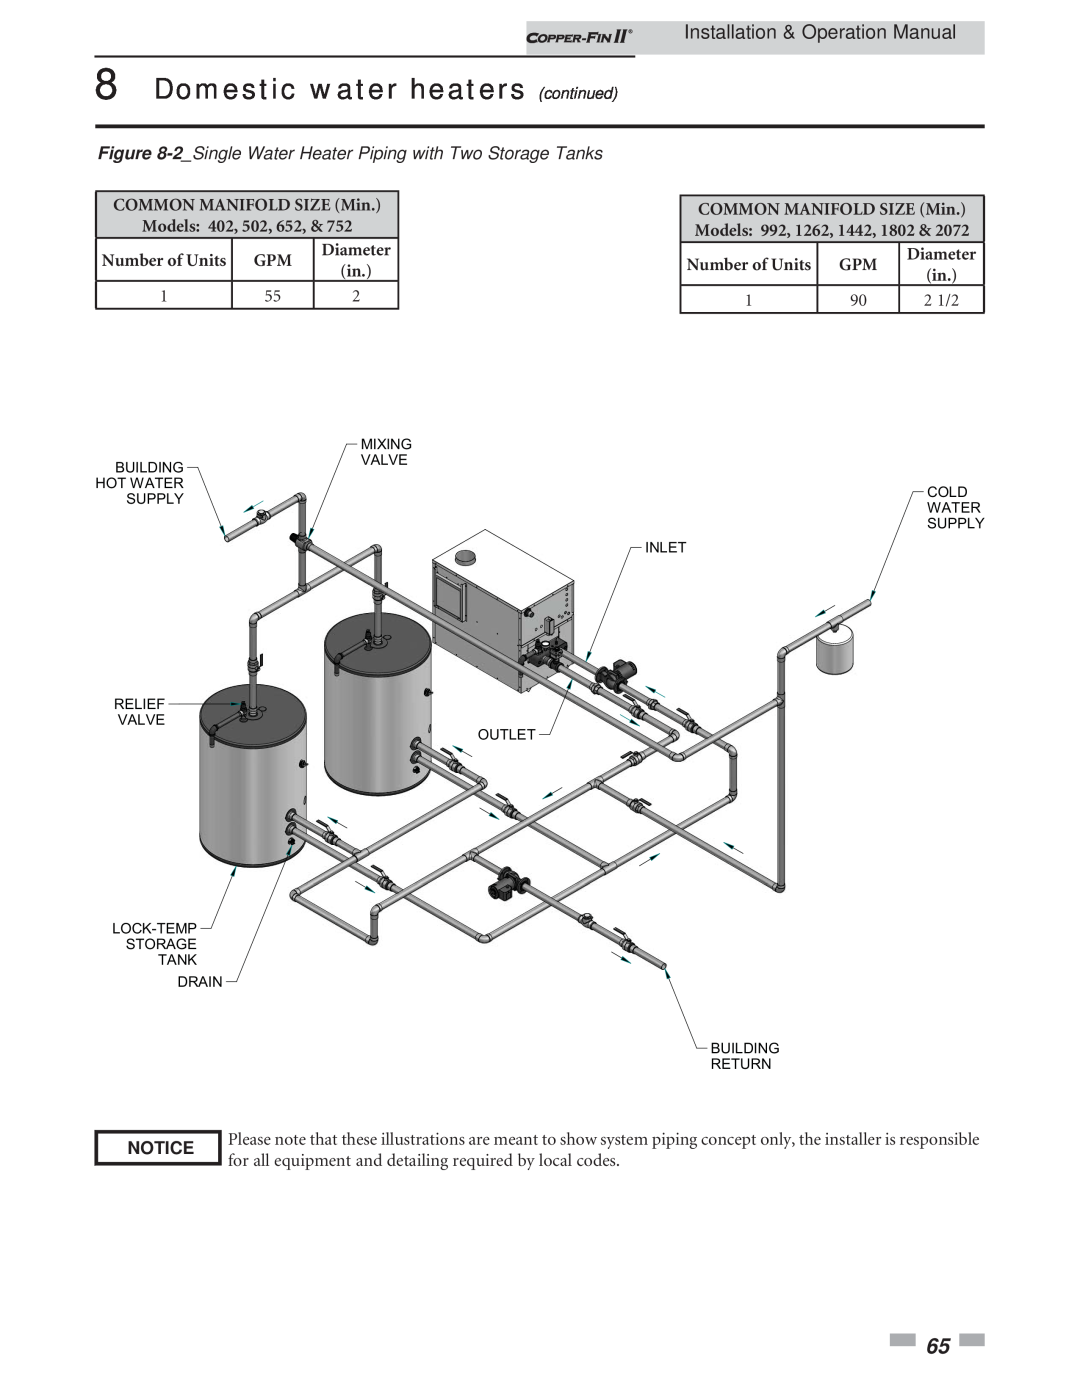 Lochinvar 402 - 2072 Domestic water heaters continued, Installation & Operation Manual, Notice, Building Hot Water Supply 